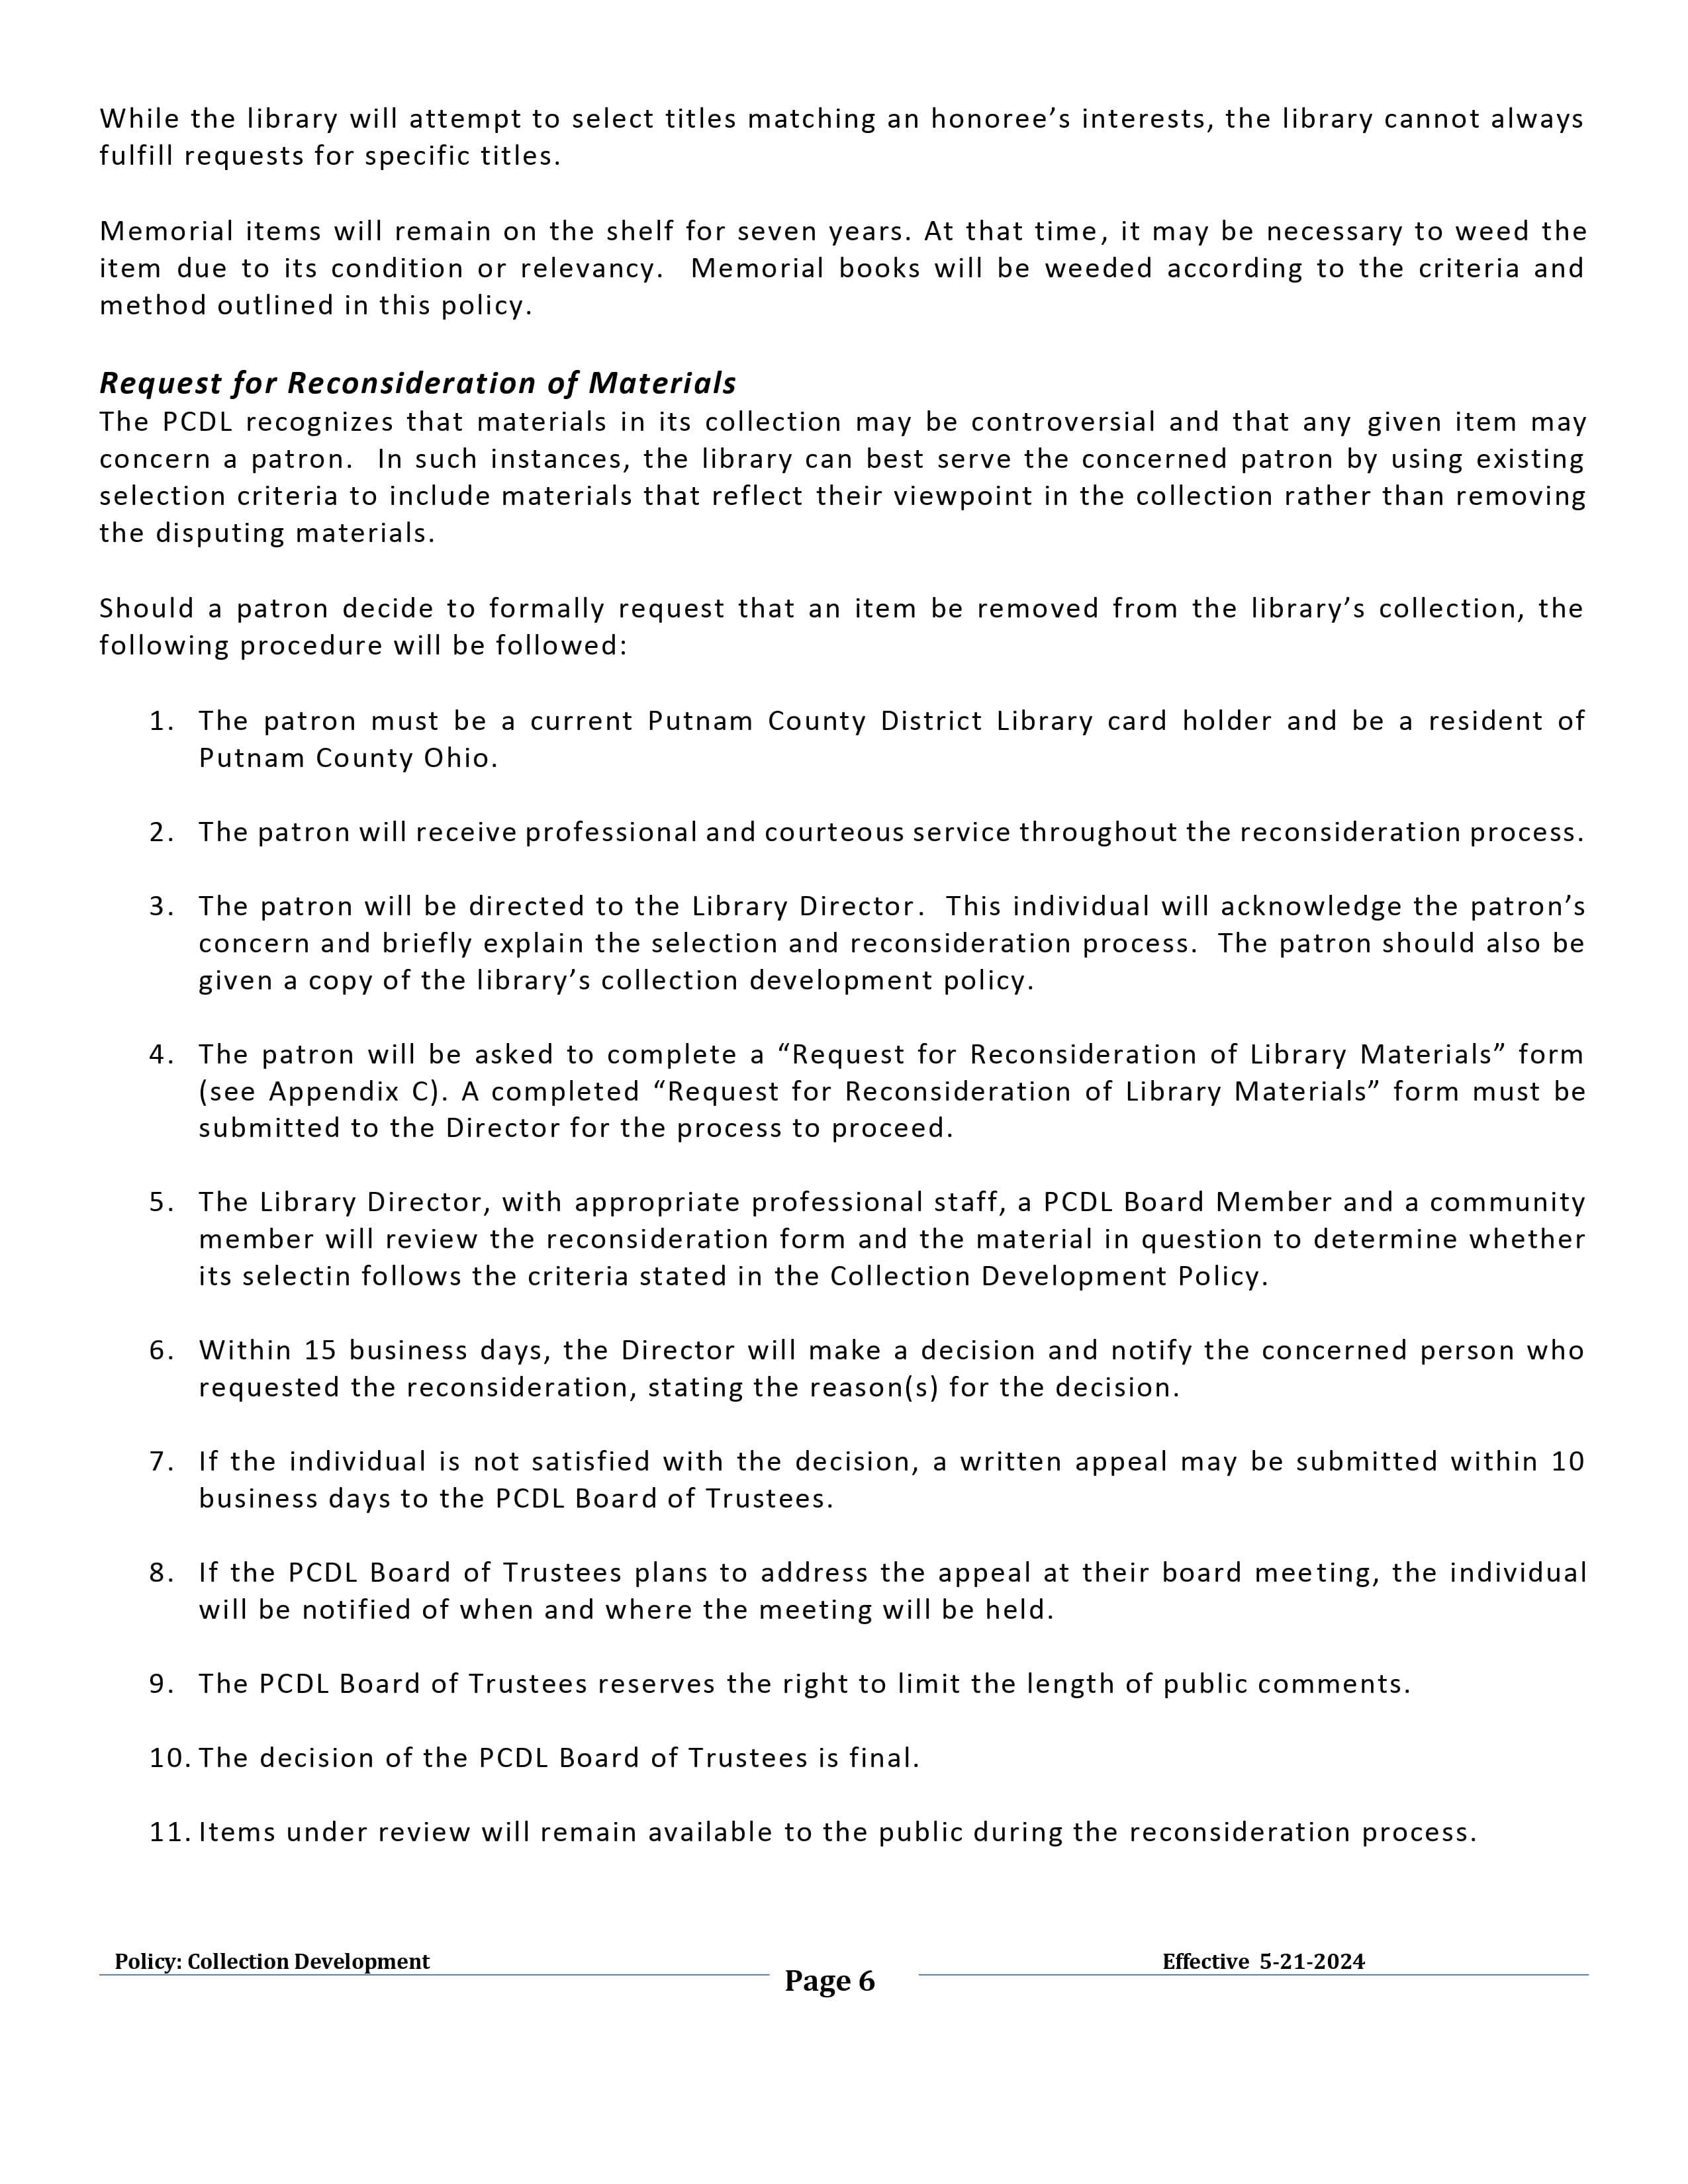 Collection Development Policy Page 6